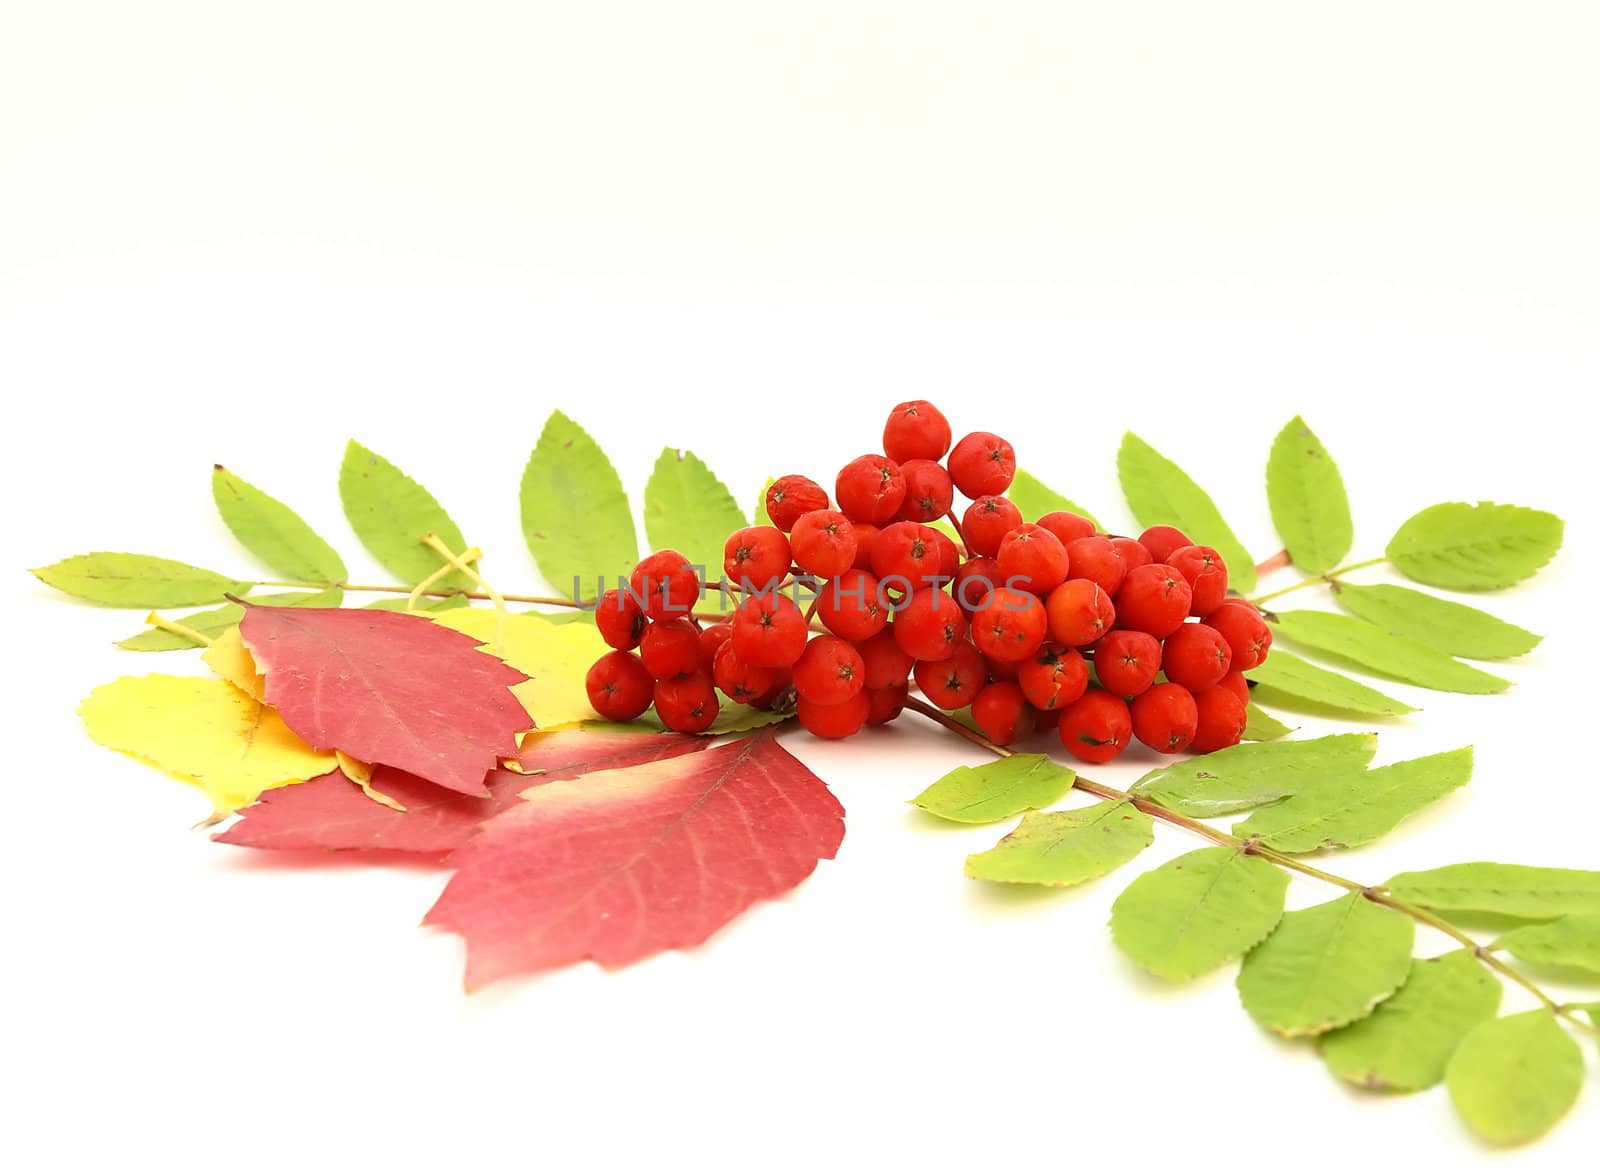 Red rowanberry and autumn leaves by sergpet